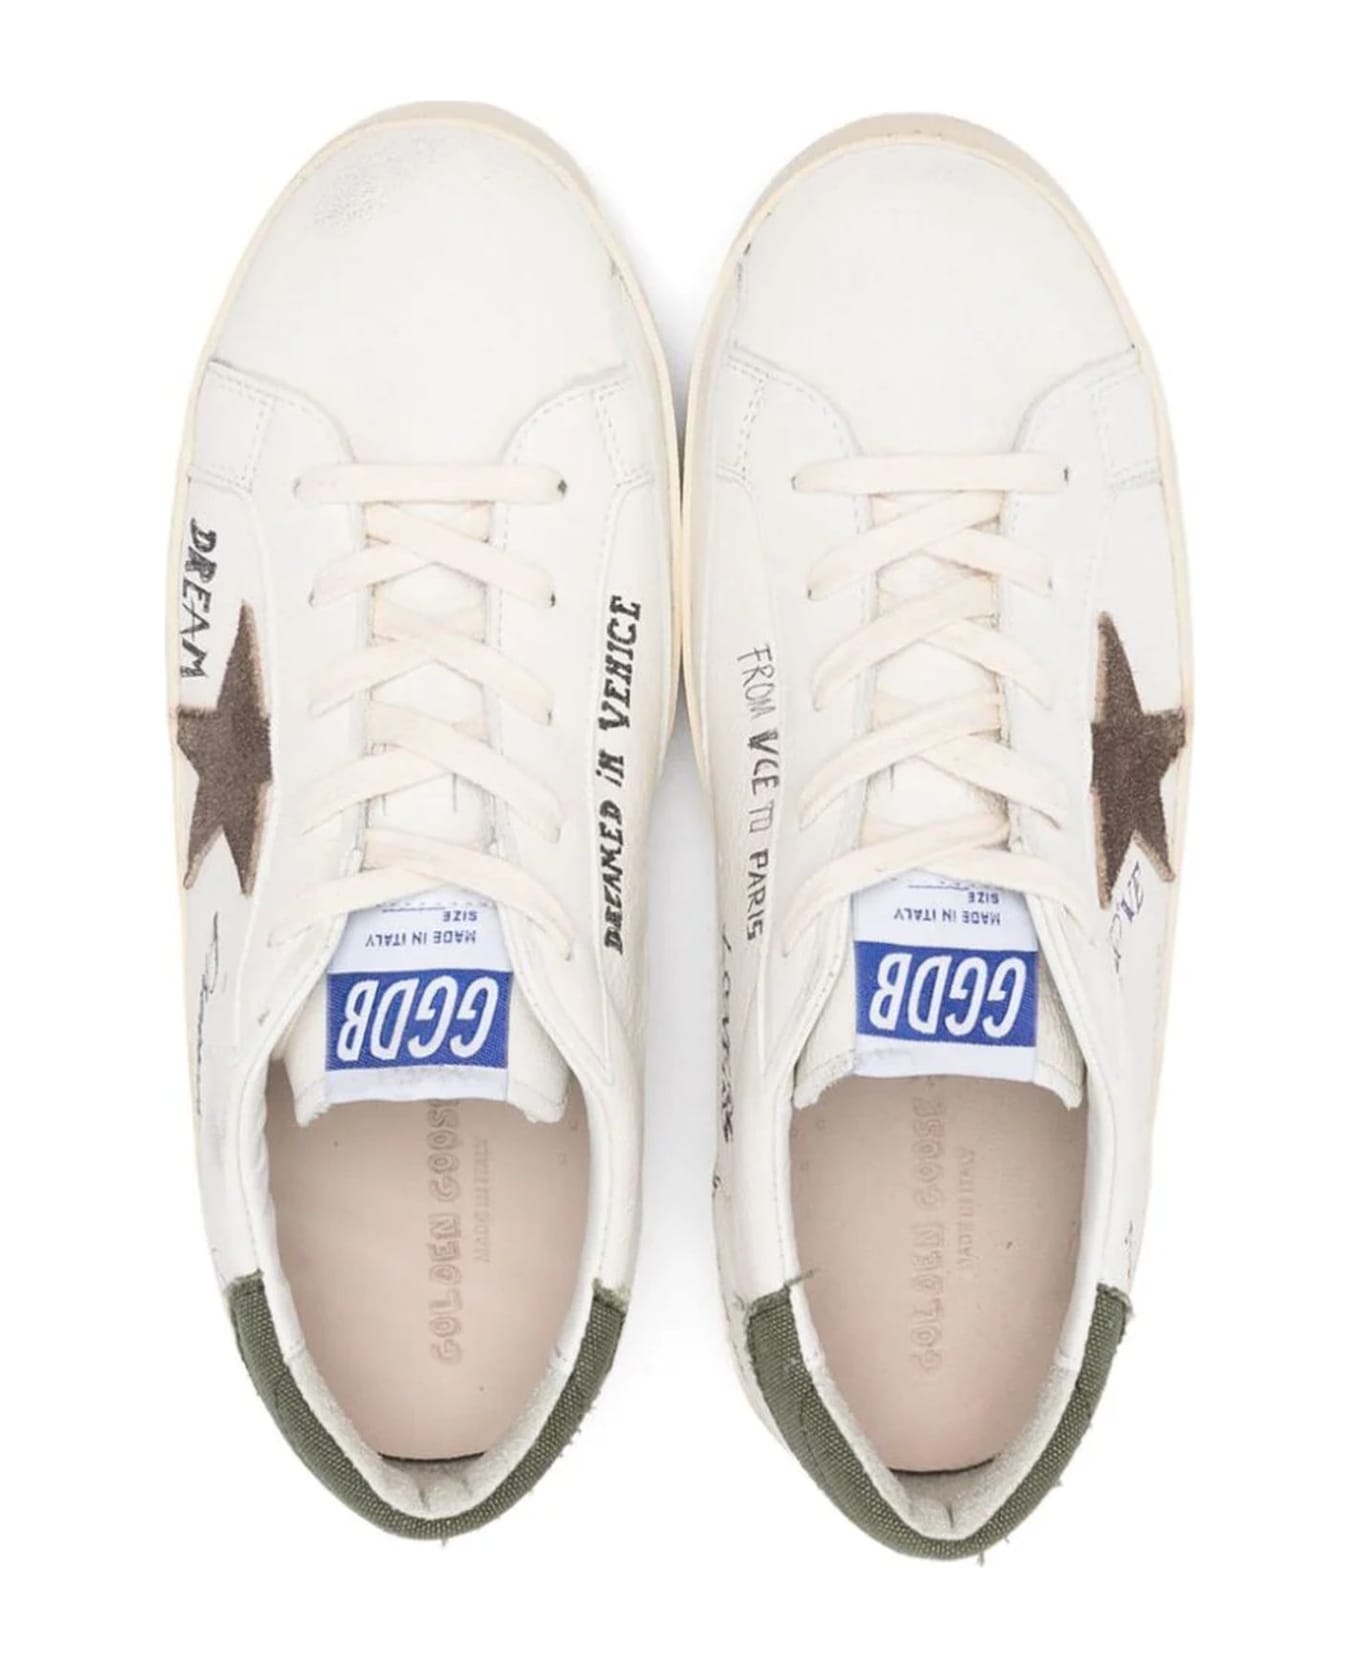 Golden Goose White Leather Sneakers - White/brown/green シューズ